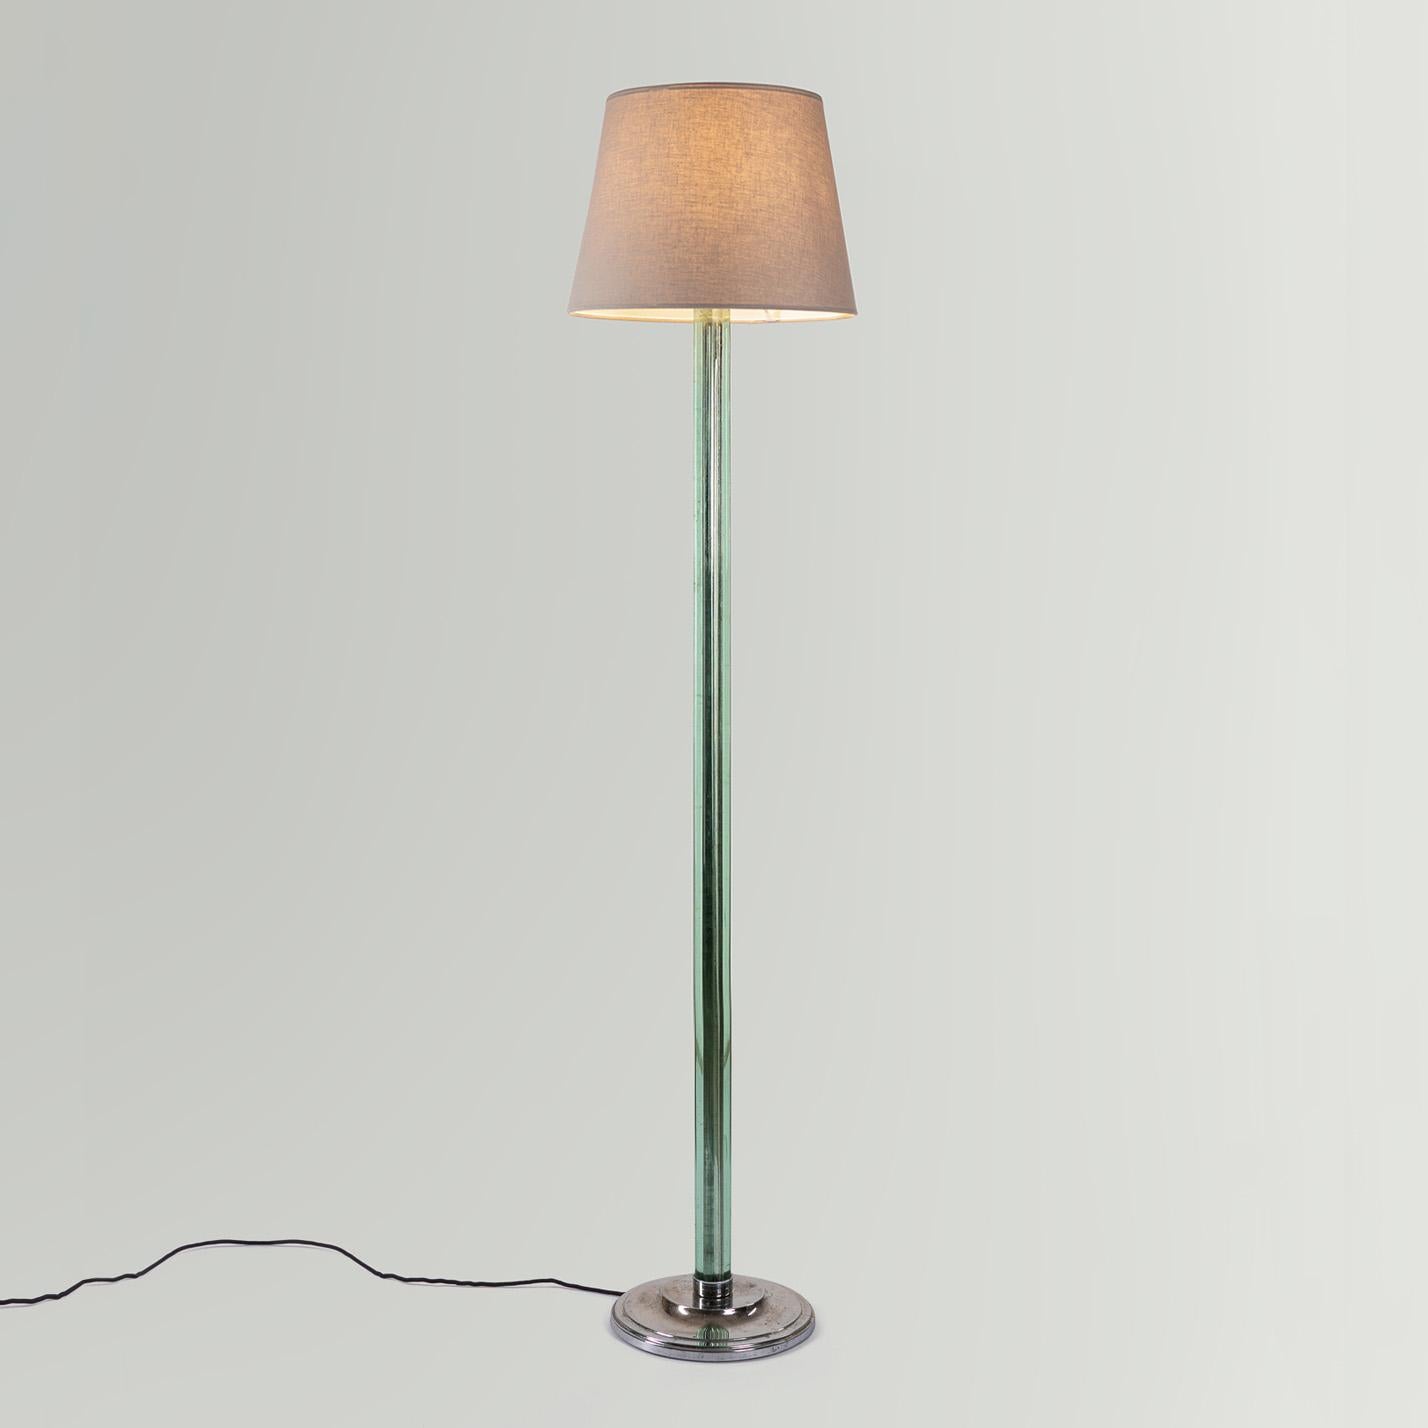 Sculptural tall Art Deco floor lamp in chrome and glass, made in former Czechoslovakia, 1930s. 

This tall Art Deco floor lamp, which was originally manufactured in Czechoslovakia during the 1930s, immediately draws attention to its distinctive